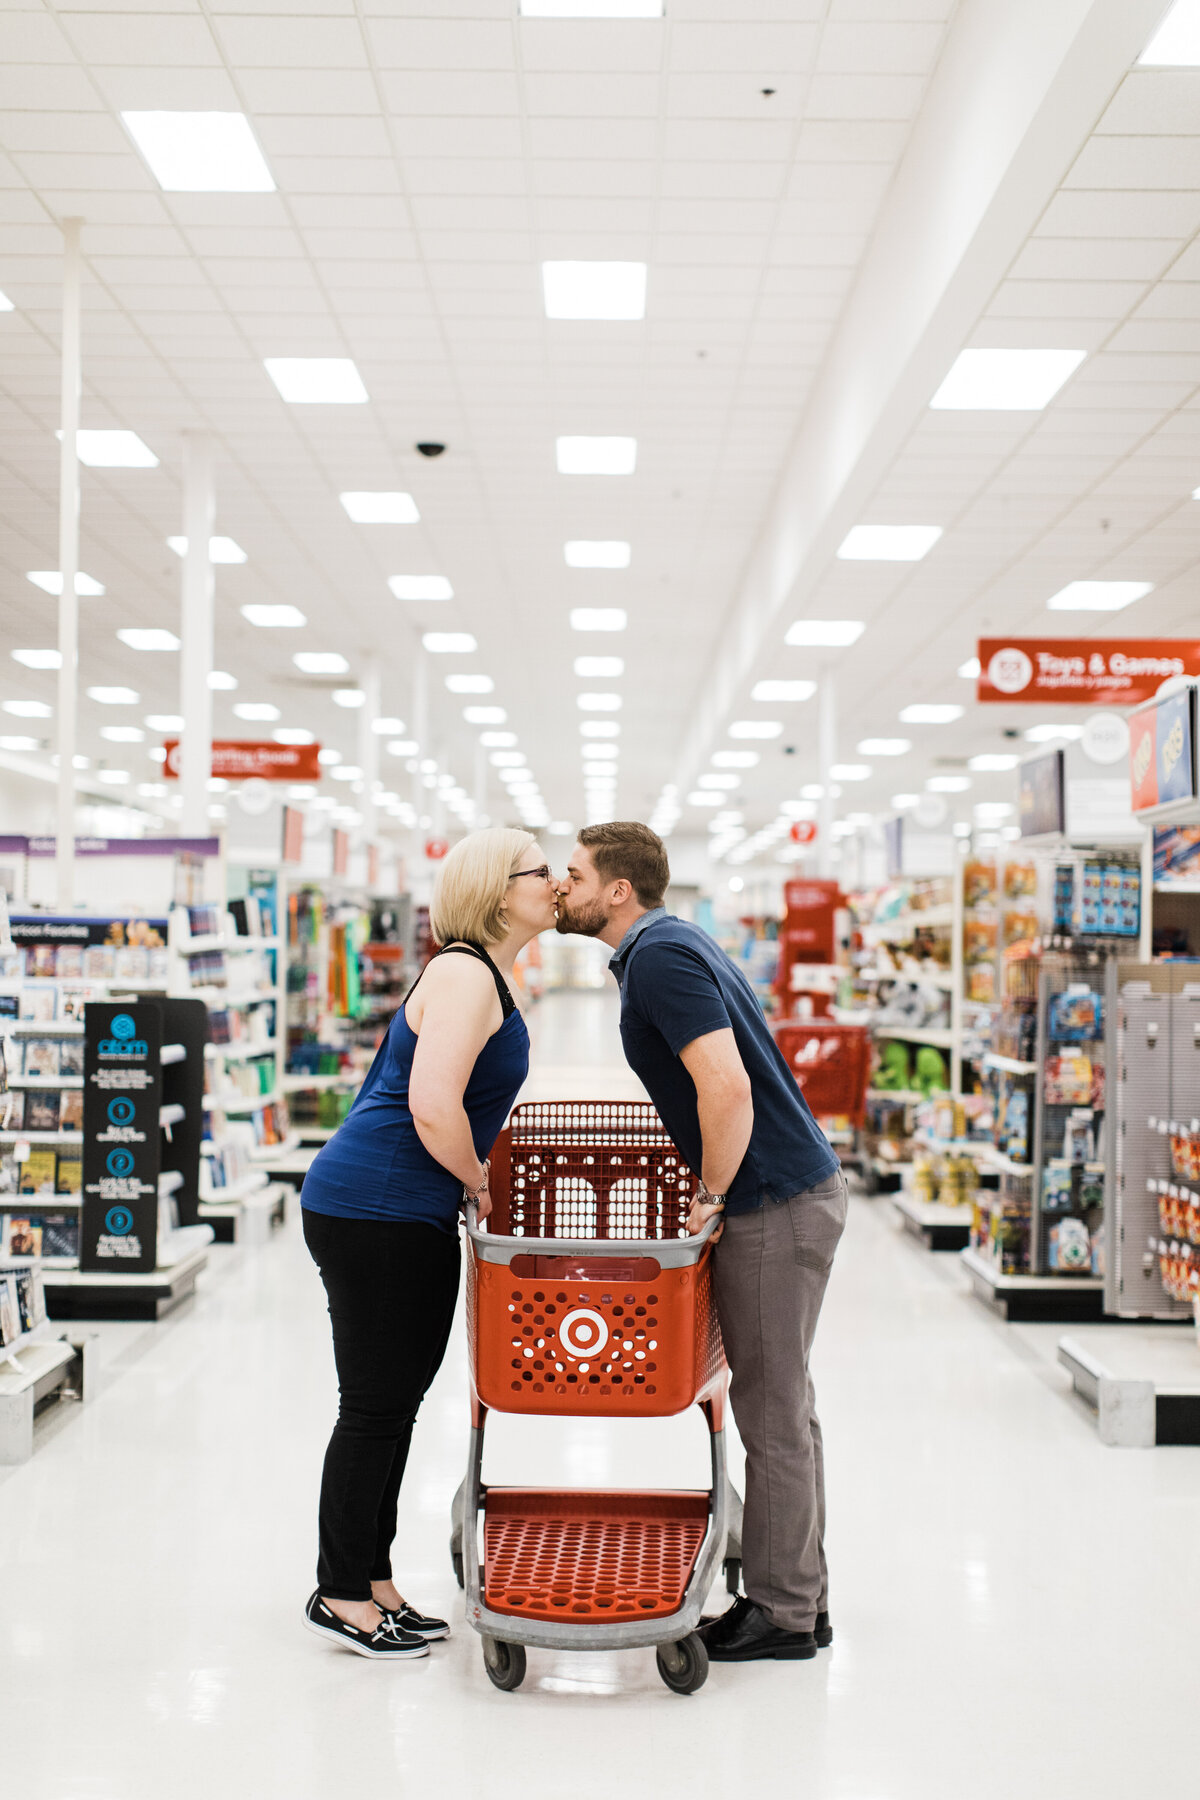 A couple sharing a kiss over a shopping cart at a Target during their engagement session in DFW, Texas. The woman on the right is wearing a dark blue tank top, black pants, and glasses. The man on the left is wearing a short sleeve collared blue shirt and grey pants. Many rows of the Target store can be seen in the background.